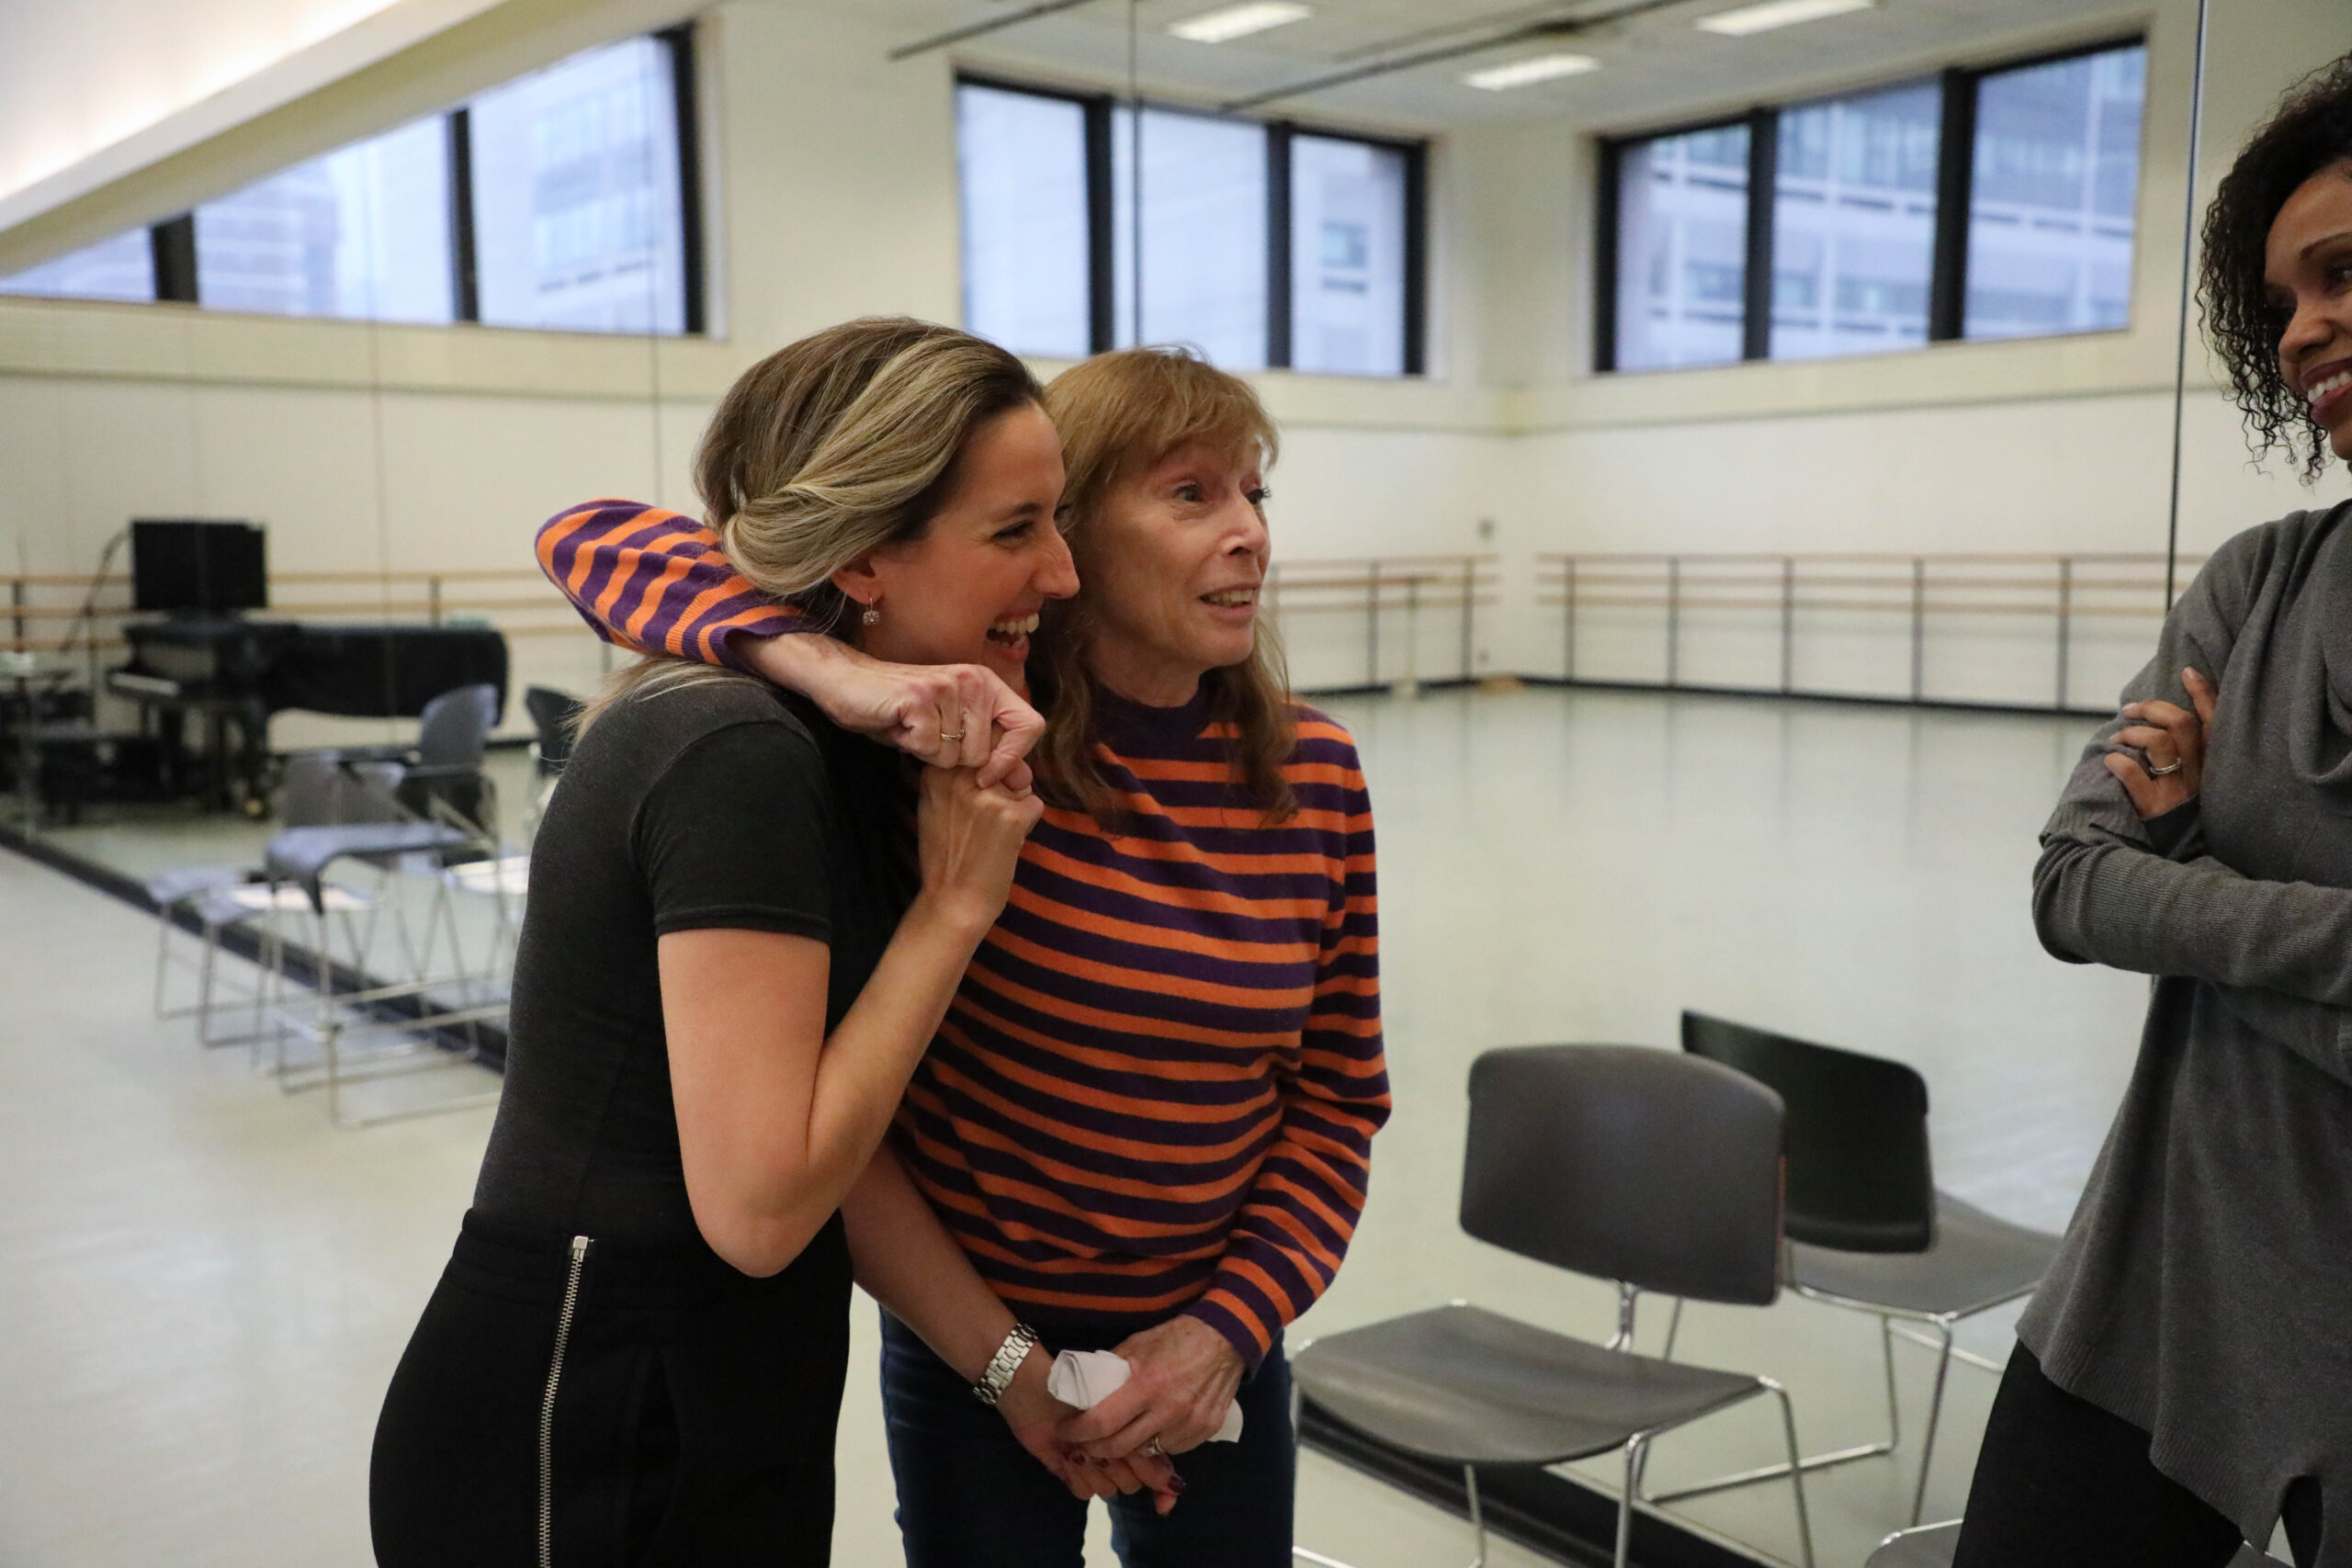 SAB Alumna and current Artistic Director of Los Angeles Ballet, Melissa Barak with SAB Faculty member, Susan Pillare and SAB Associate Chair of Faculty, Aesha Ash